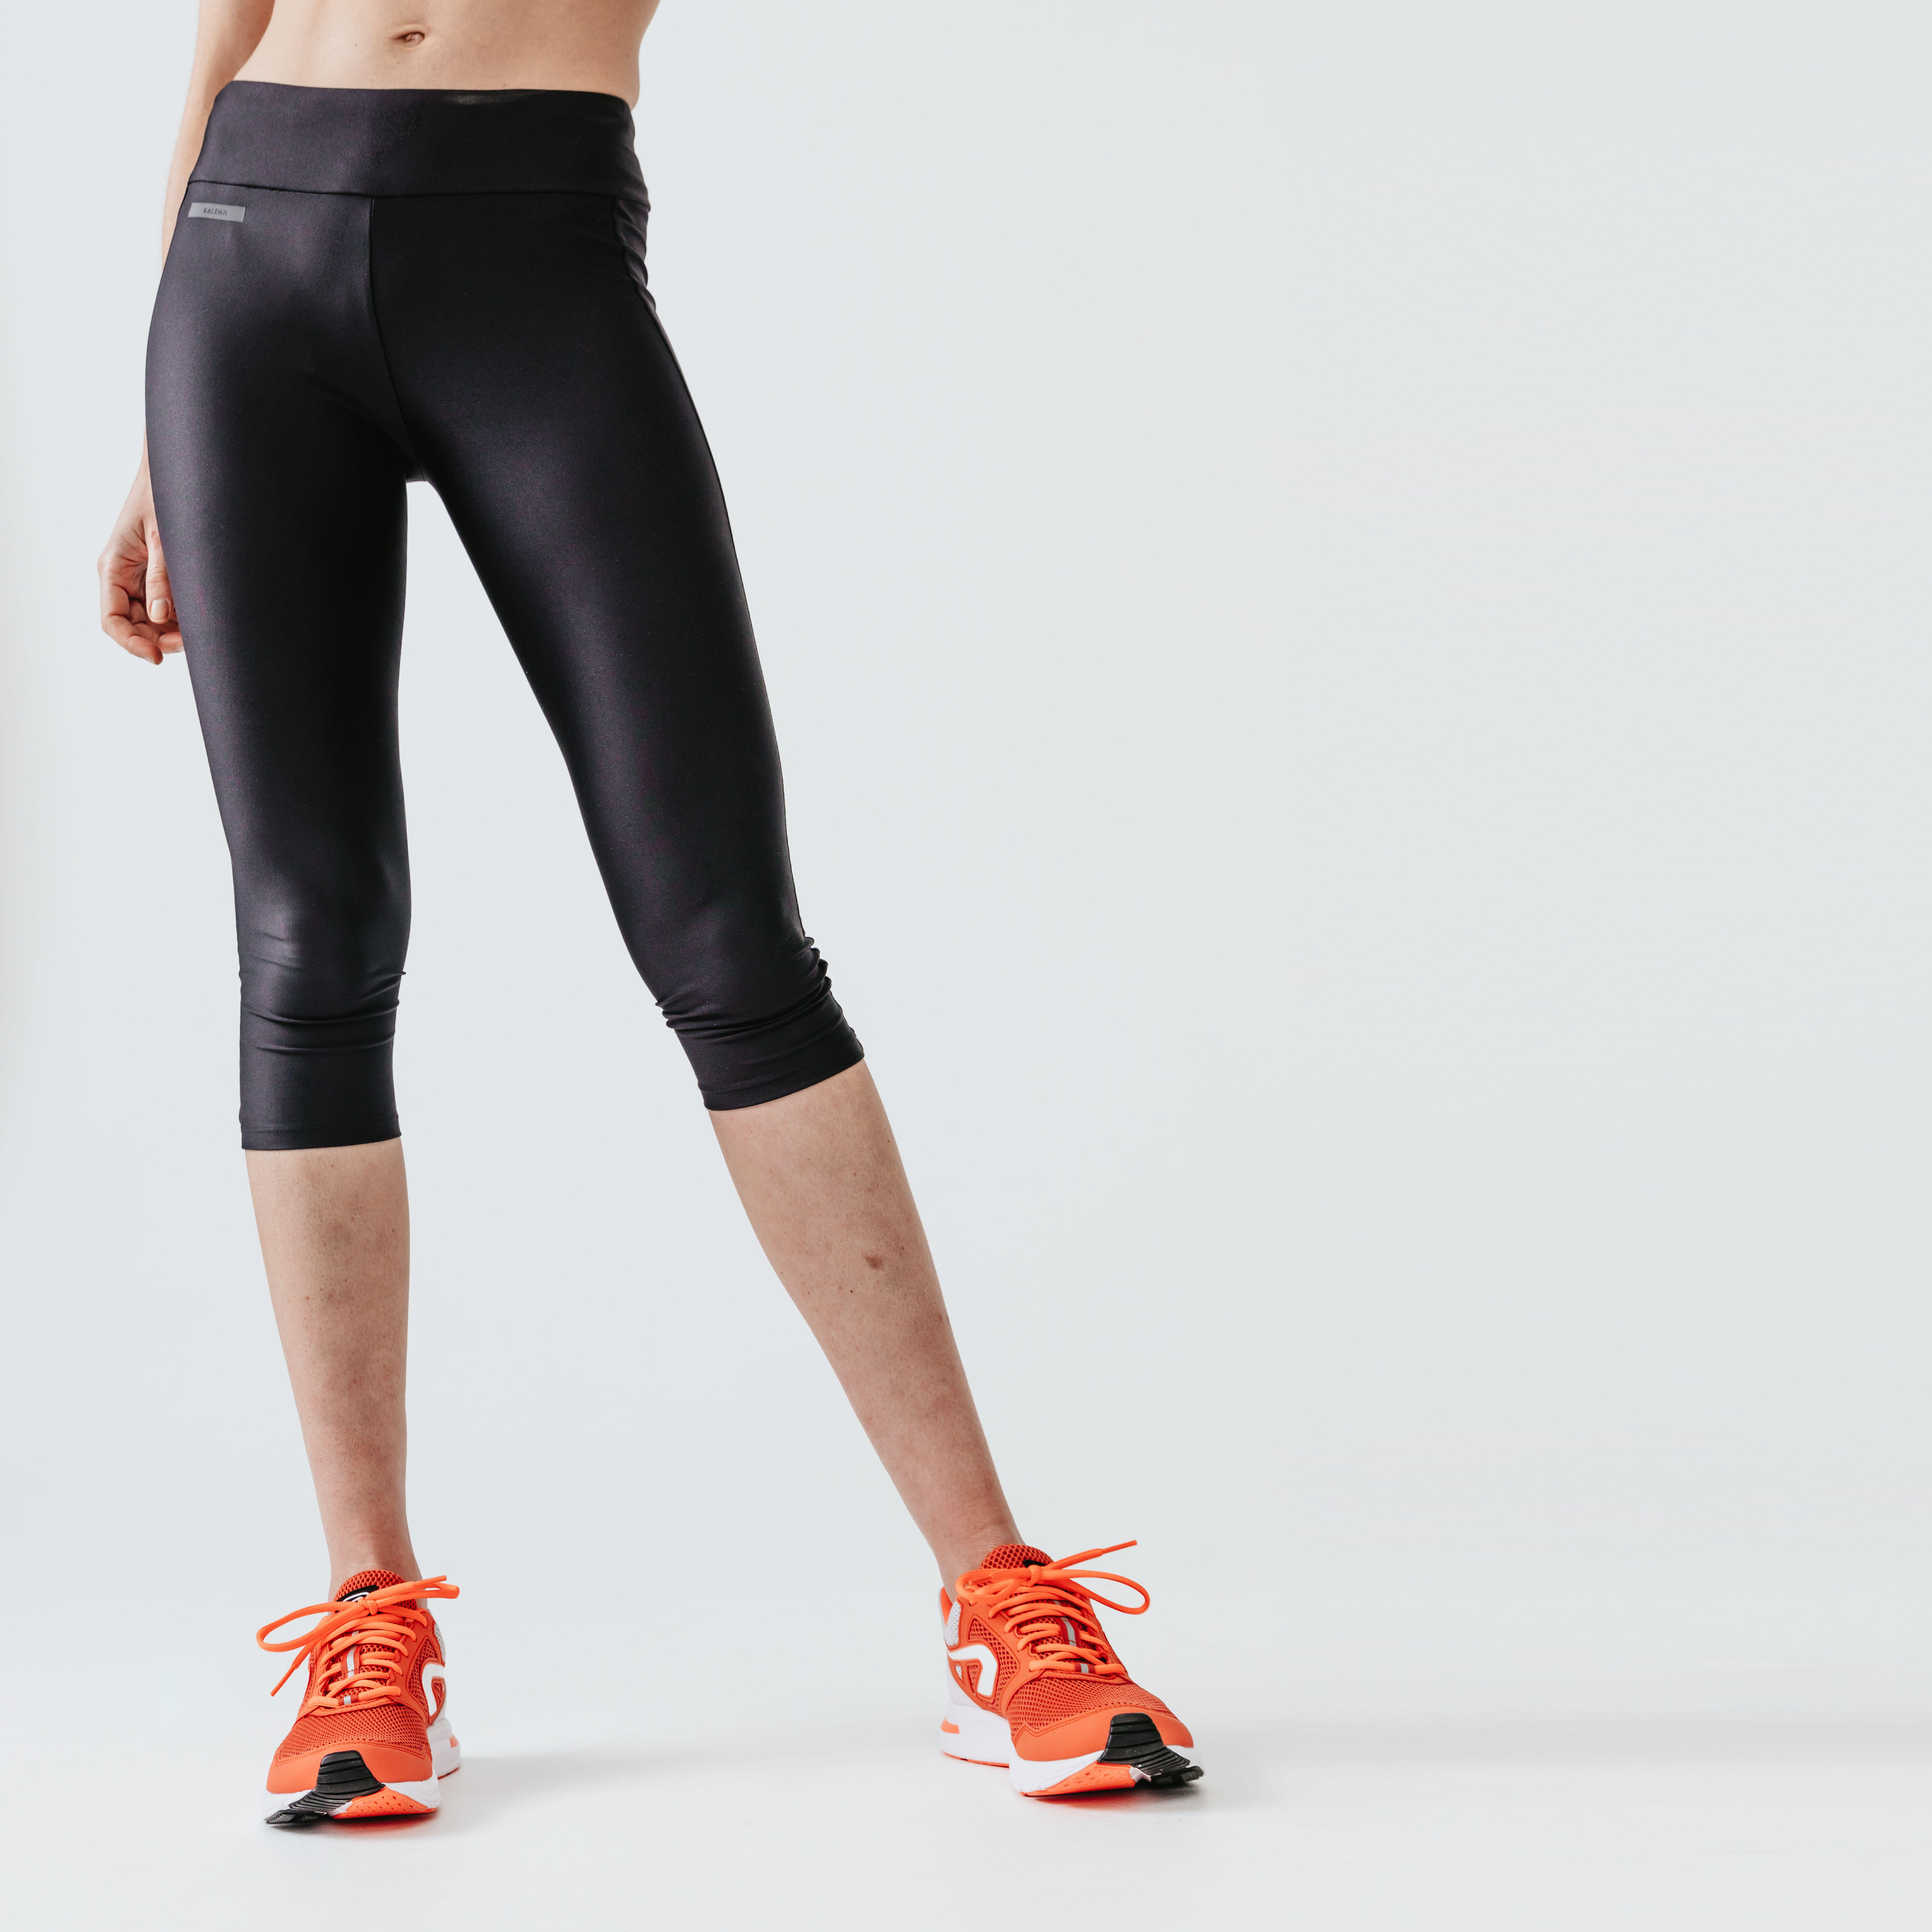 Women's Cropped Running Tights - Black